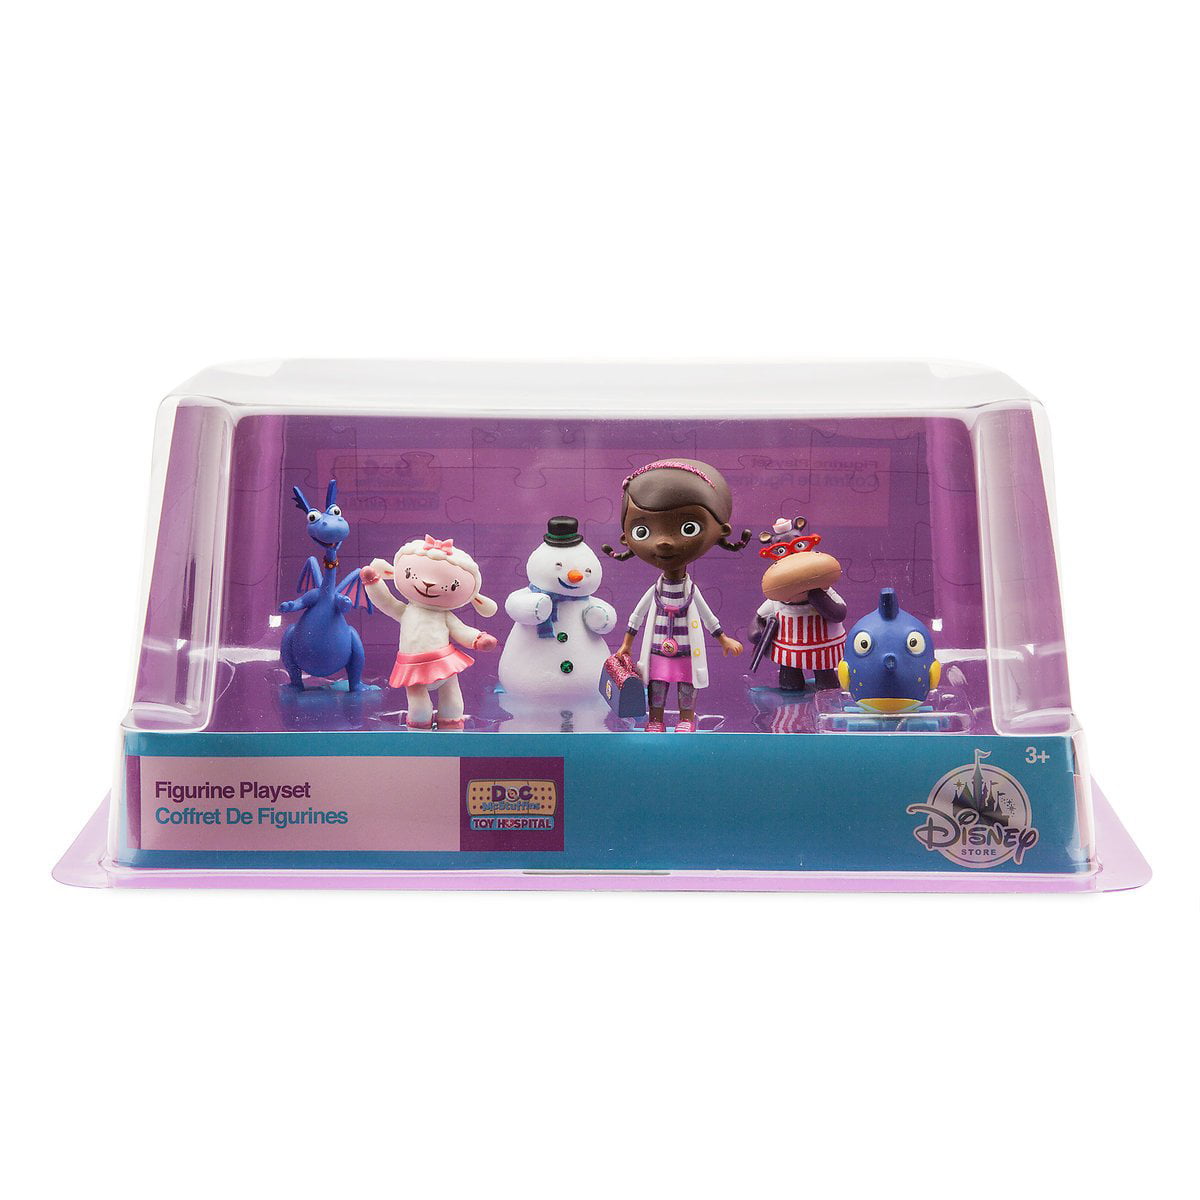 Disney Doc McStuffins Figure Play Set cake topper band new in box 